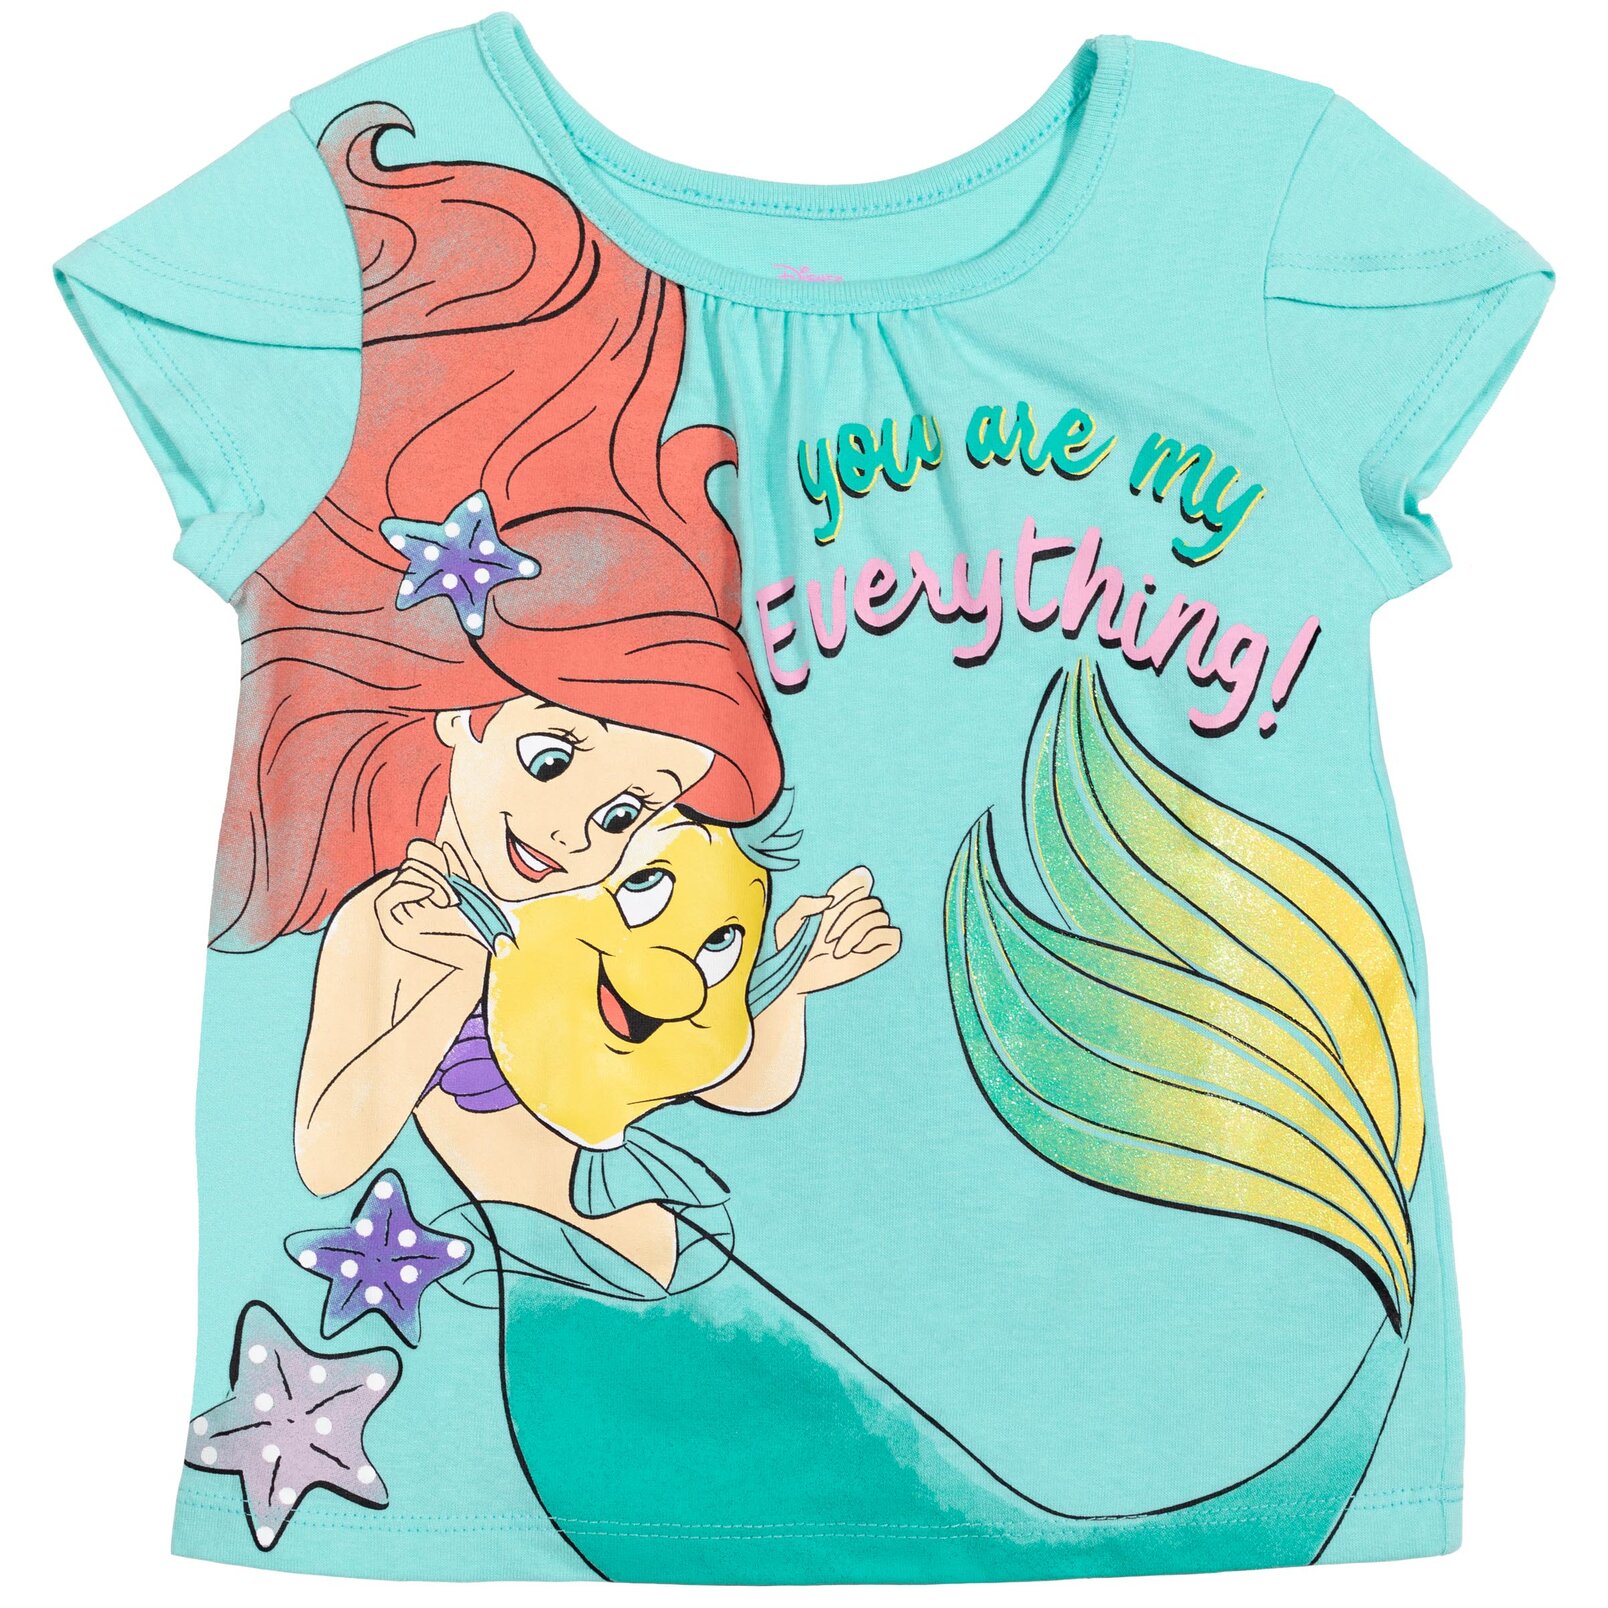 Disney Princess Ariel Little Girls T-Shirt Tulle Mesh Skirt and Scrunchie 3 Piece Outfit Set Toddler to Big Kid - image 3 of 5